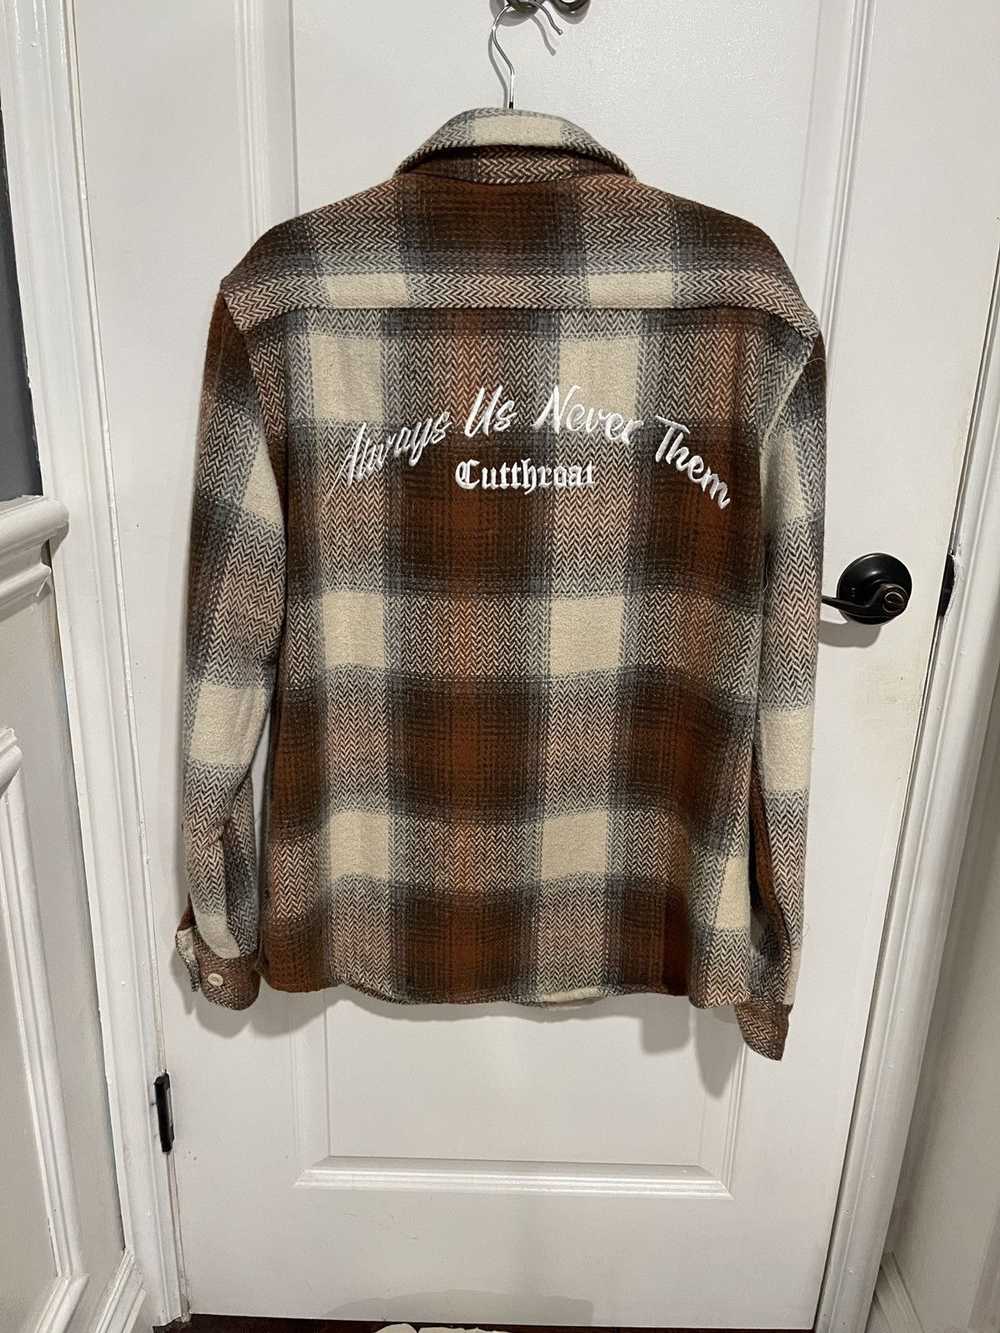 Flannel Cutthroat LA flannel Never used - image 2